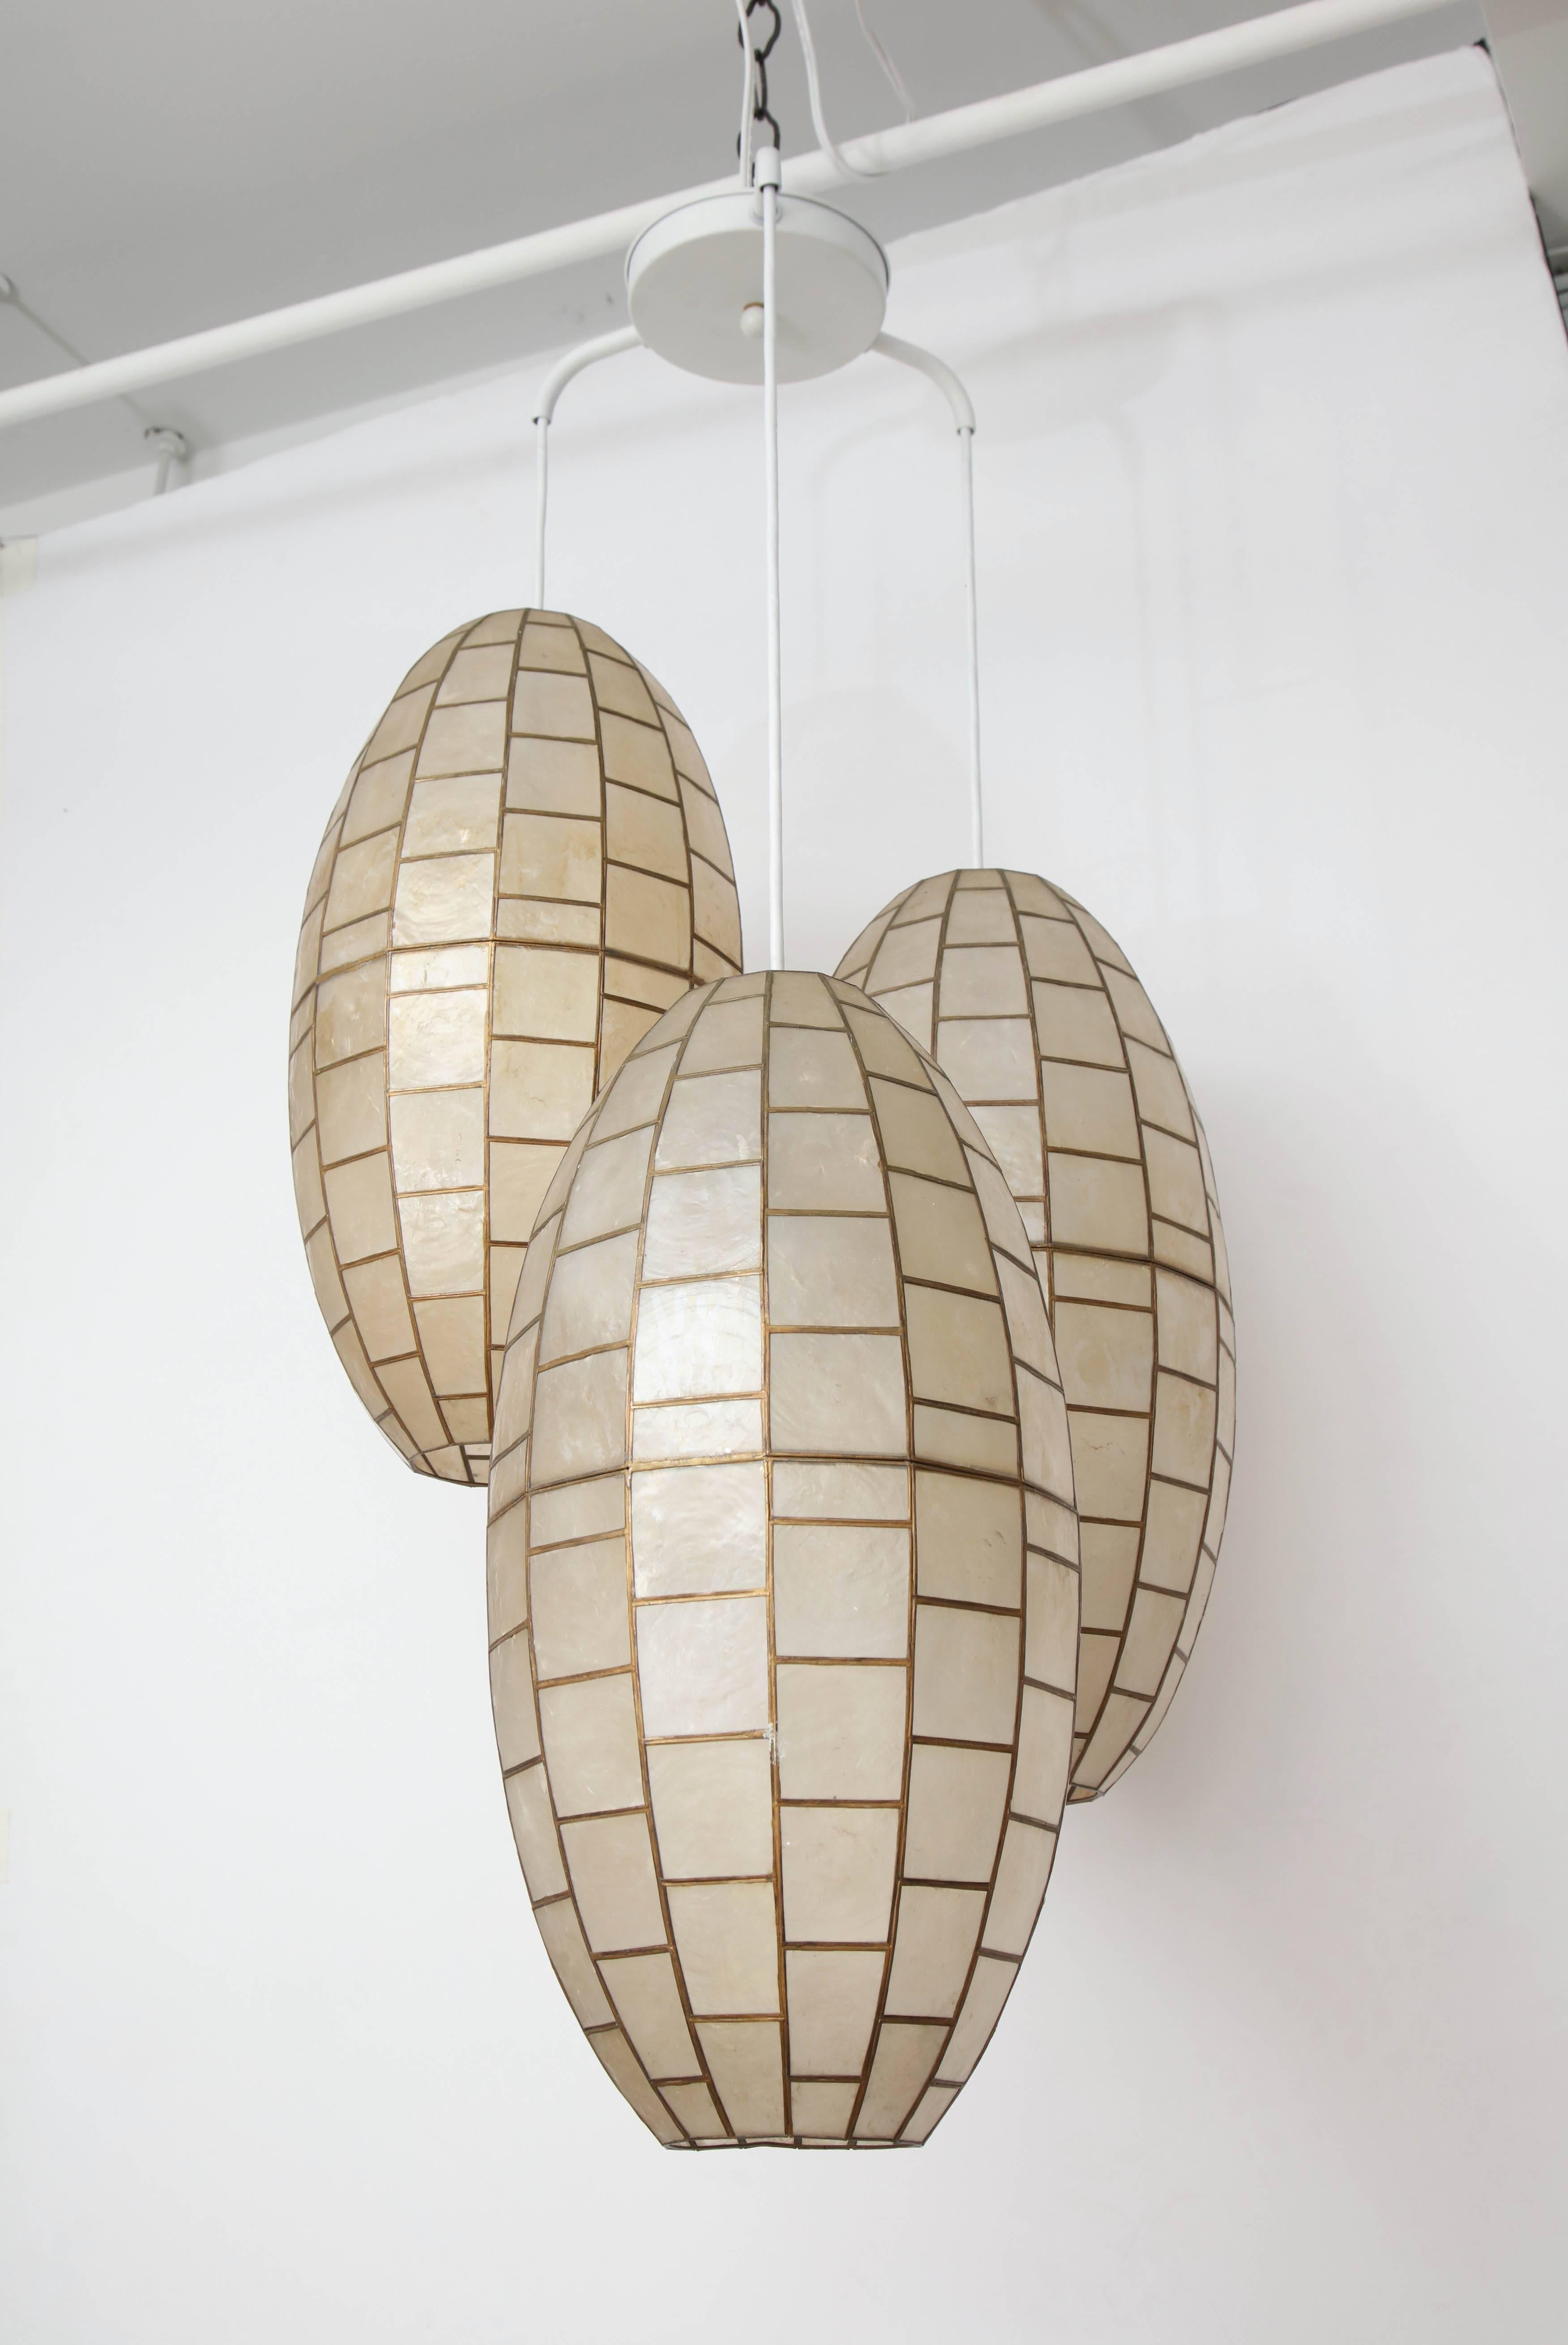 Translucent shell and metal chandelier with three oval fixtures.